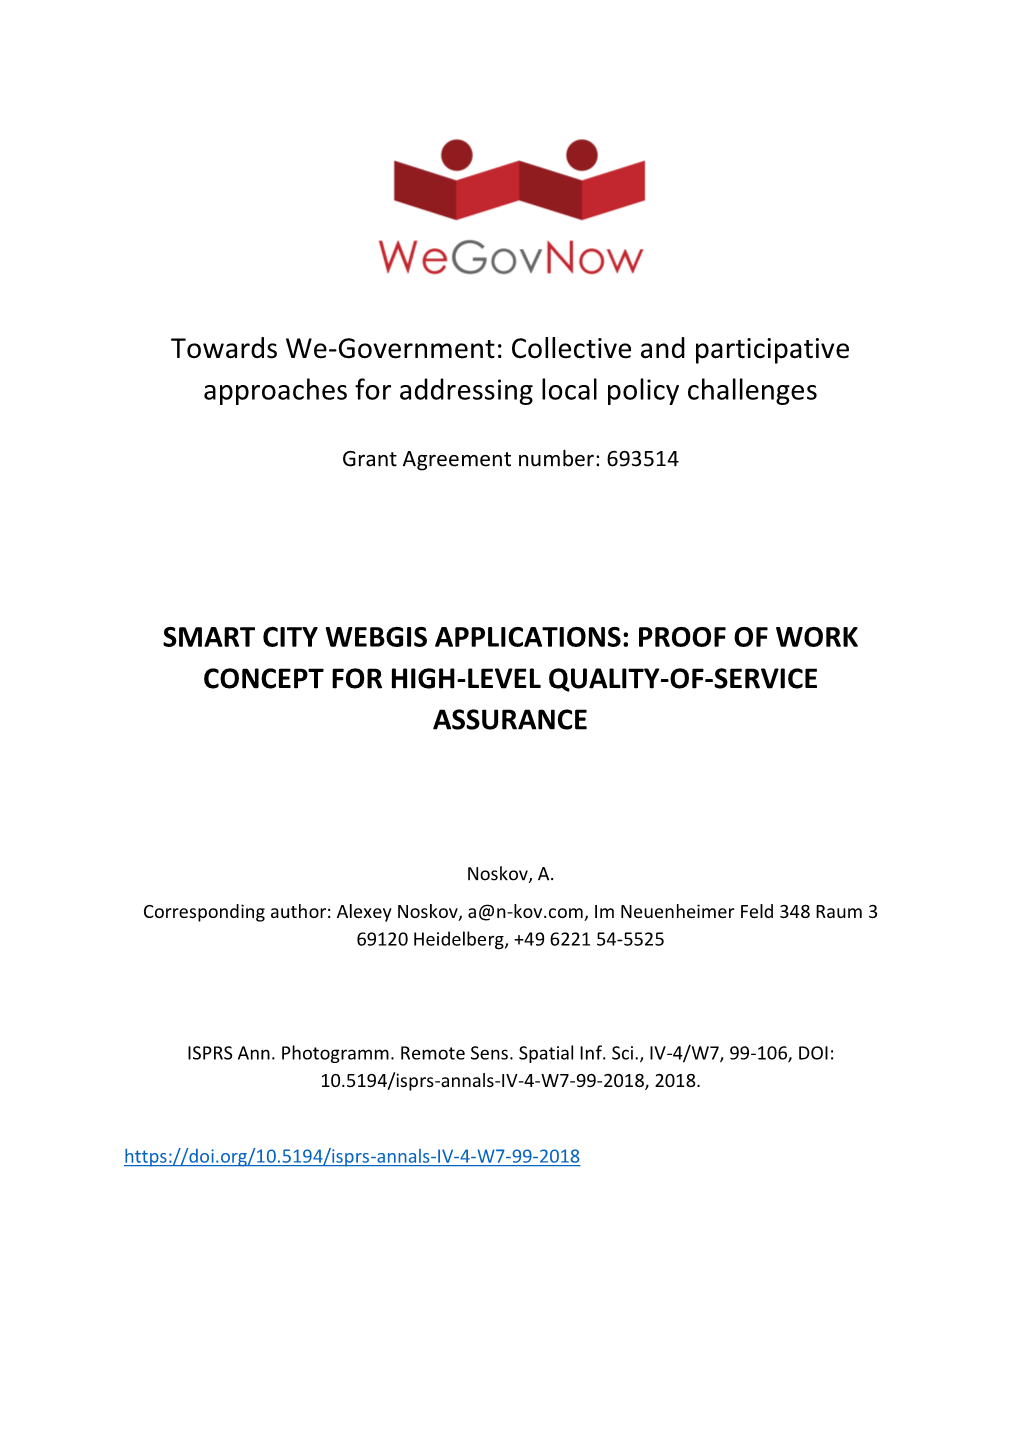 Smart City Webgis Applications: Proof of Work Concept for High-Level Quality-Of-Service Assurance